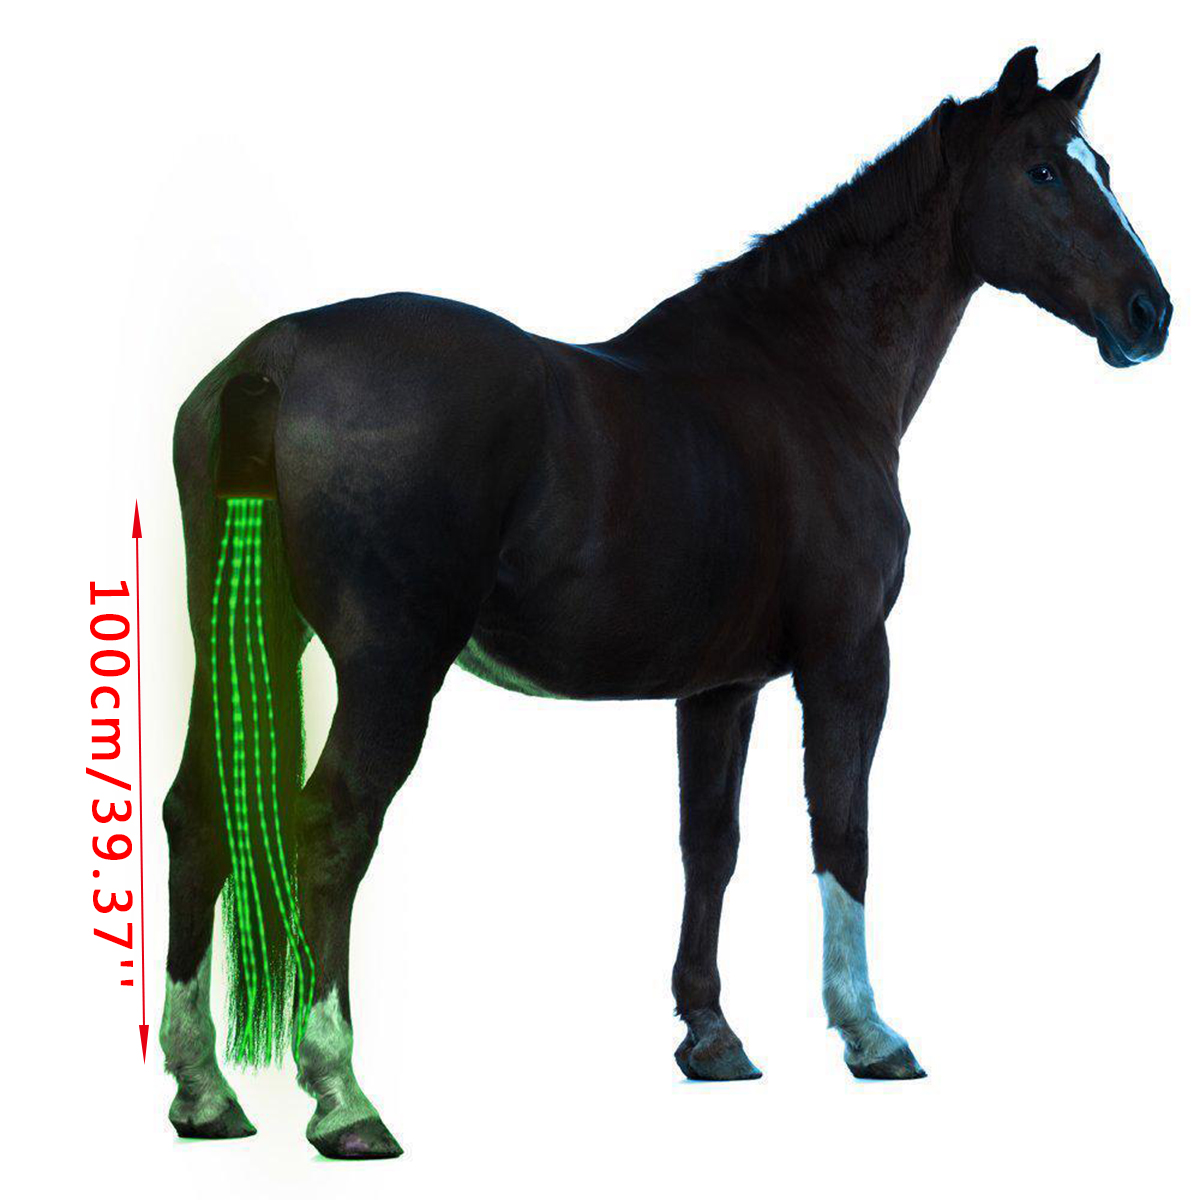 100cm-Horse-Tail-Light-USB-Chargeable-LED-Camping-Lamp-Sports-Horse-Harness-Equestrian-Lantern-1357699